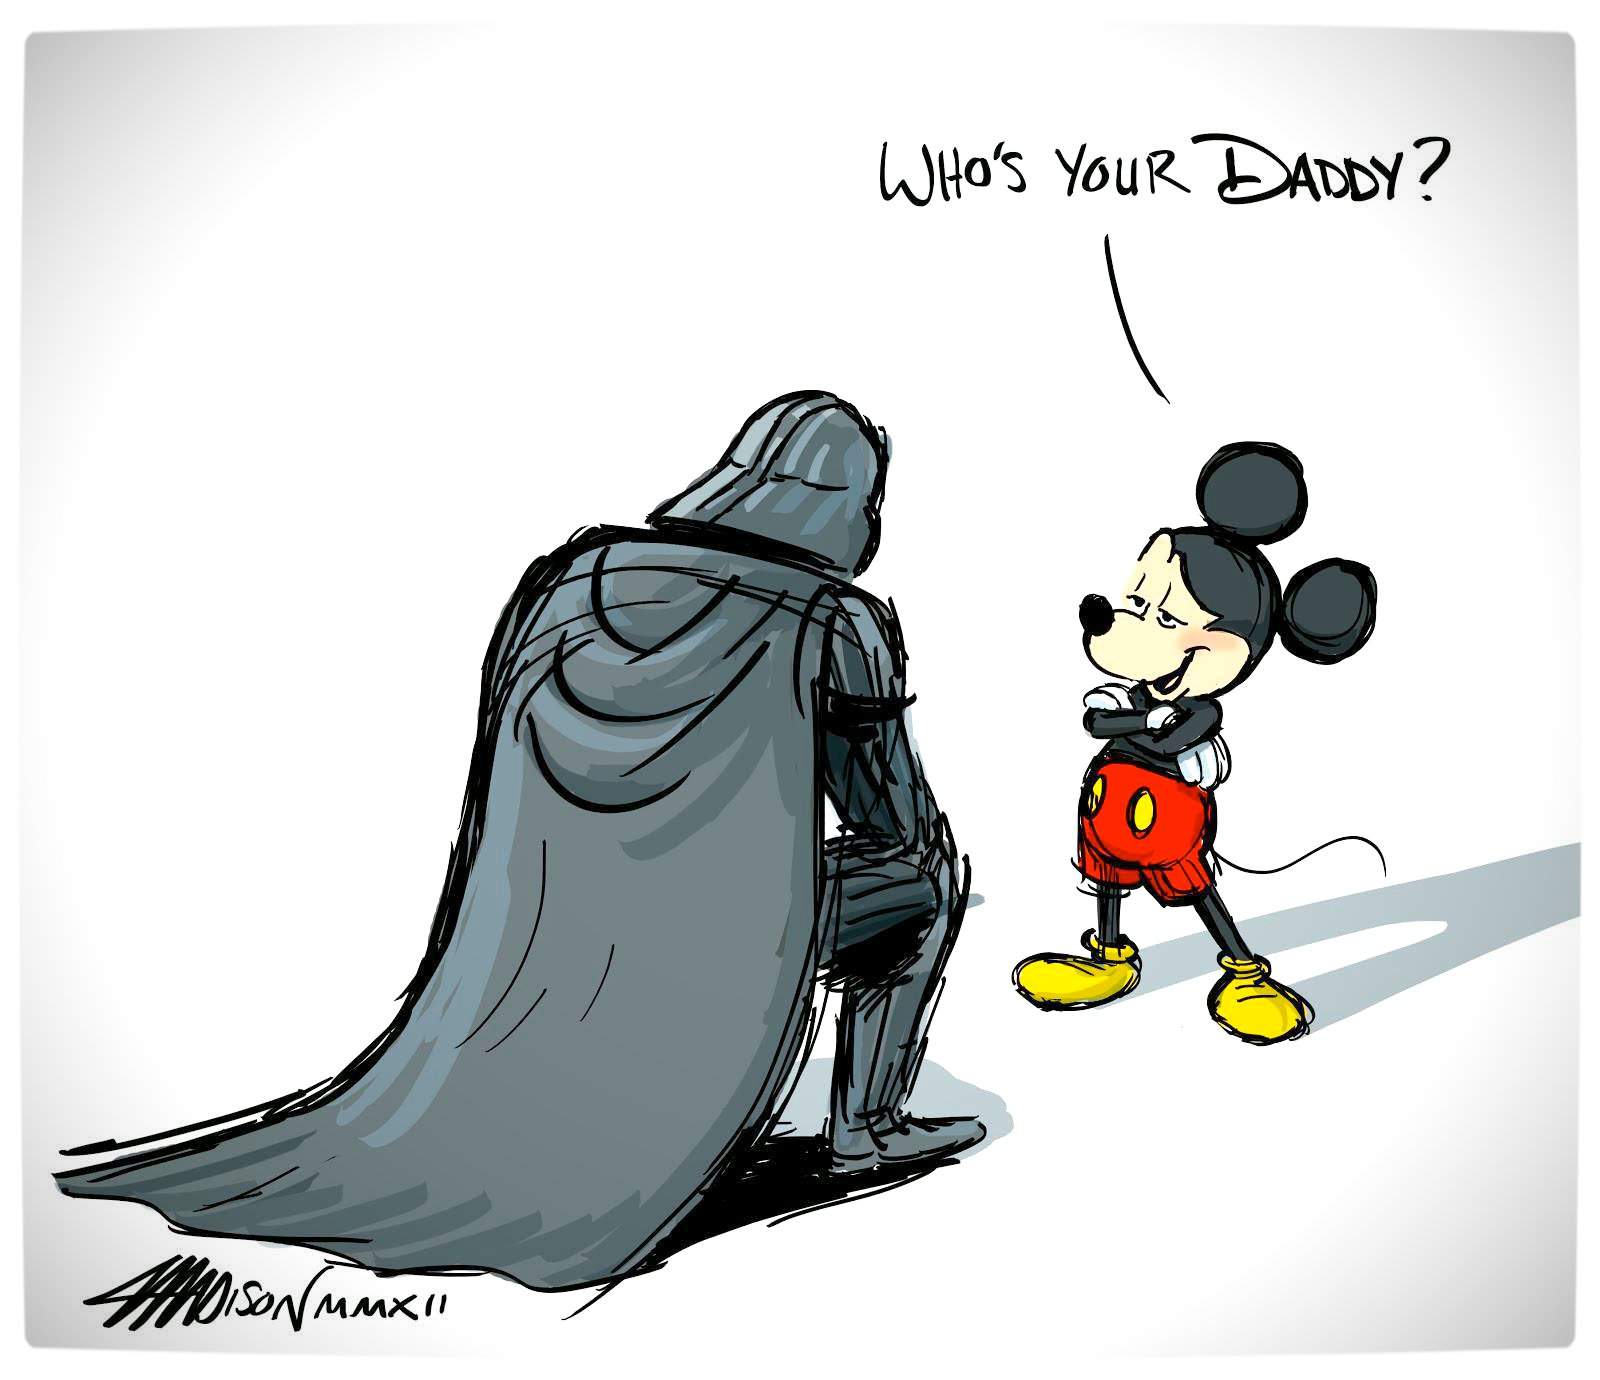 Darth Vader kneeling before Mickey Mouse